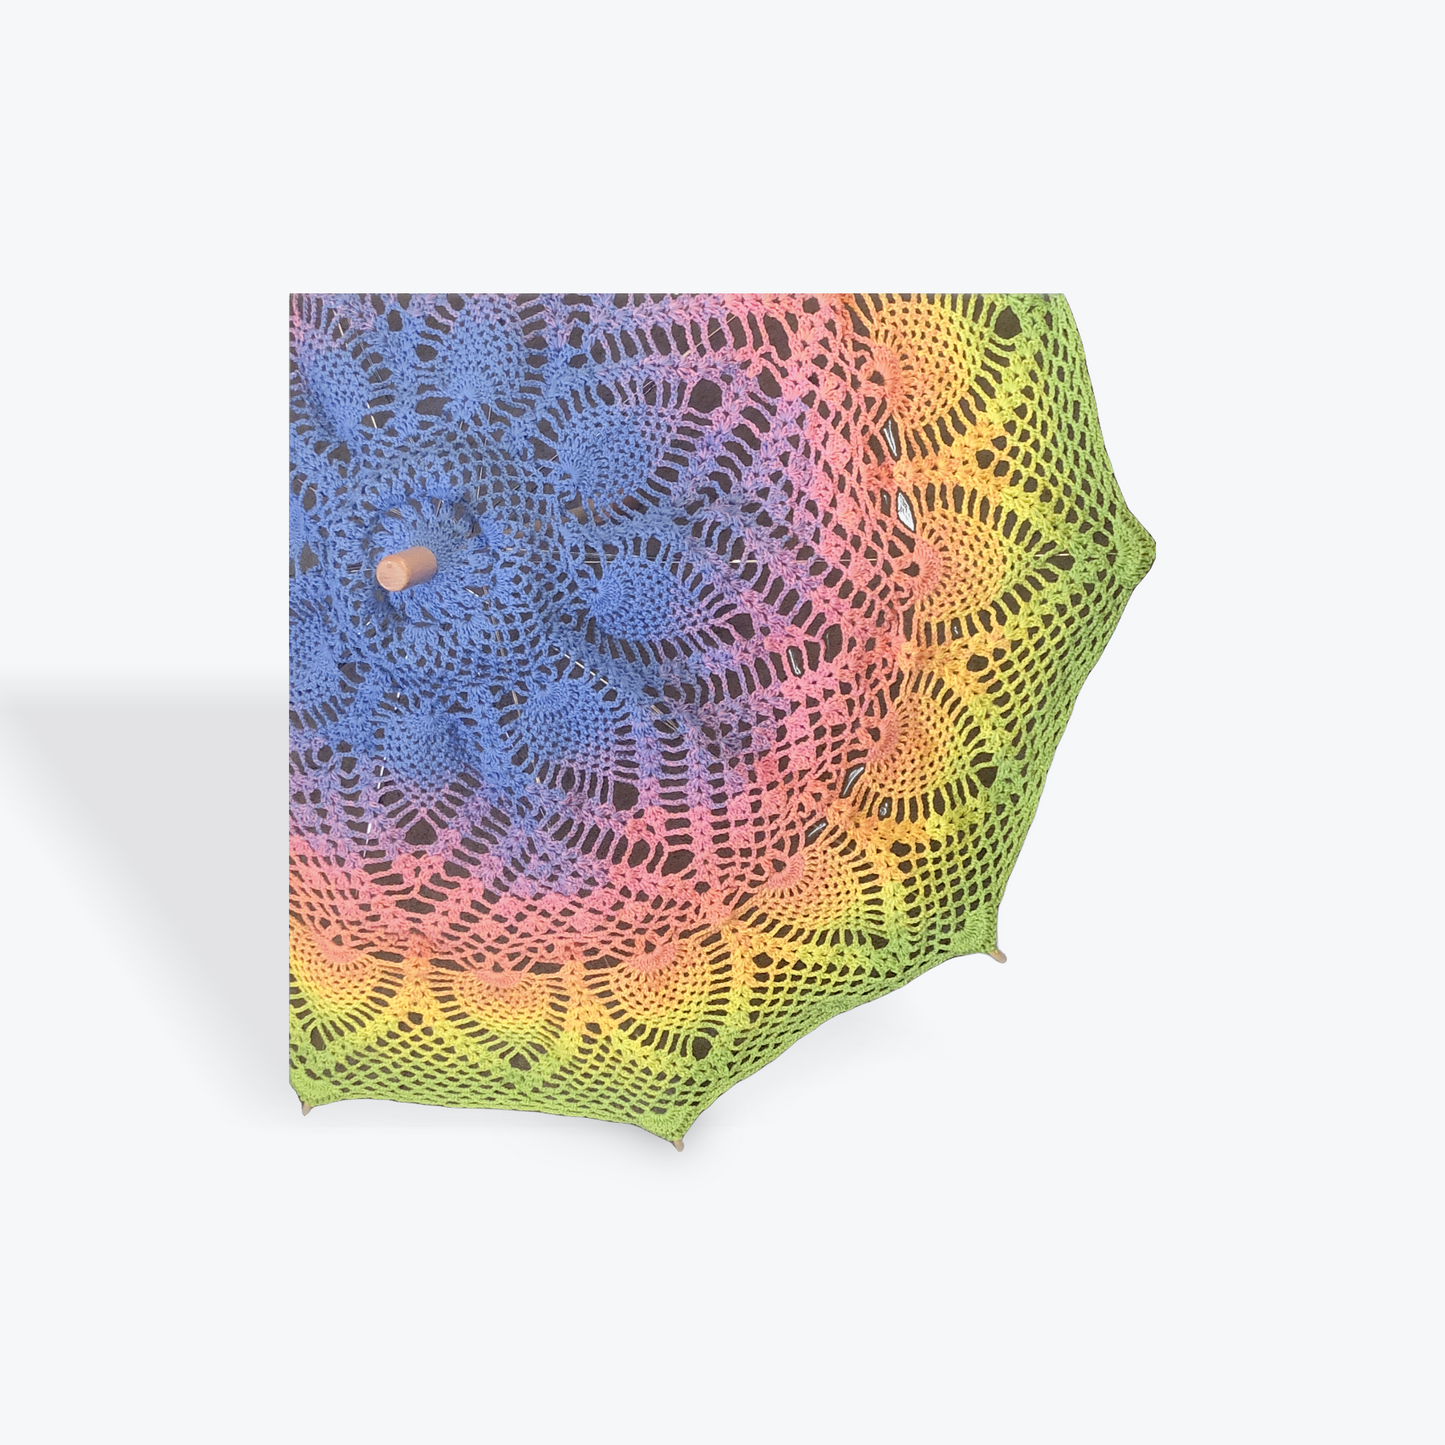 Sapphic Pride Flag 33" Parasol - Stitchy Frood